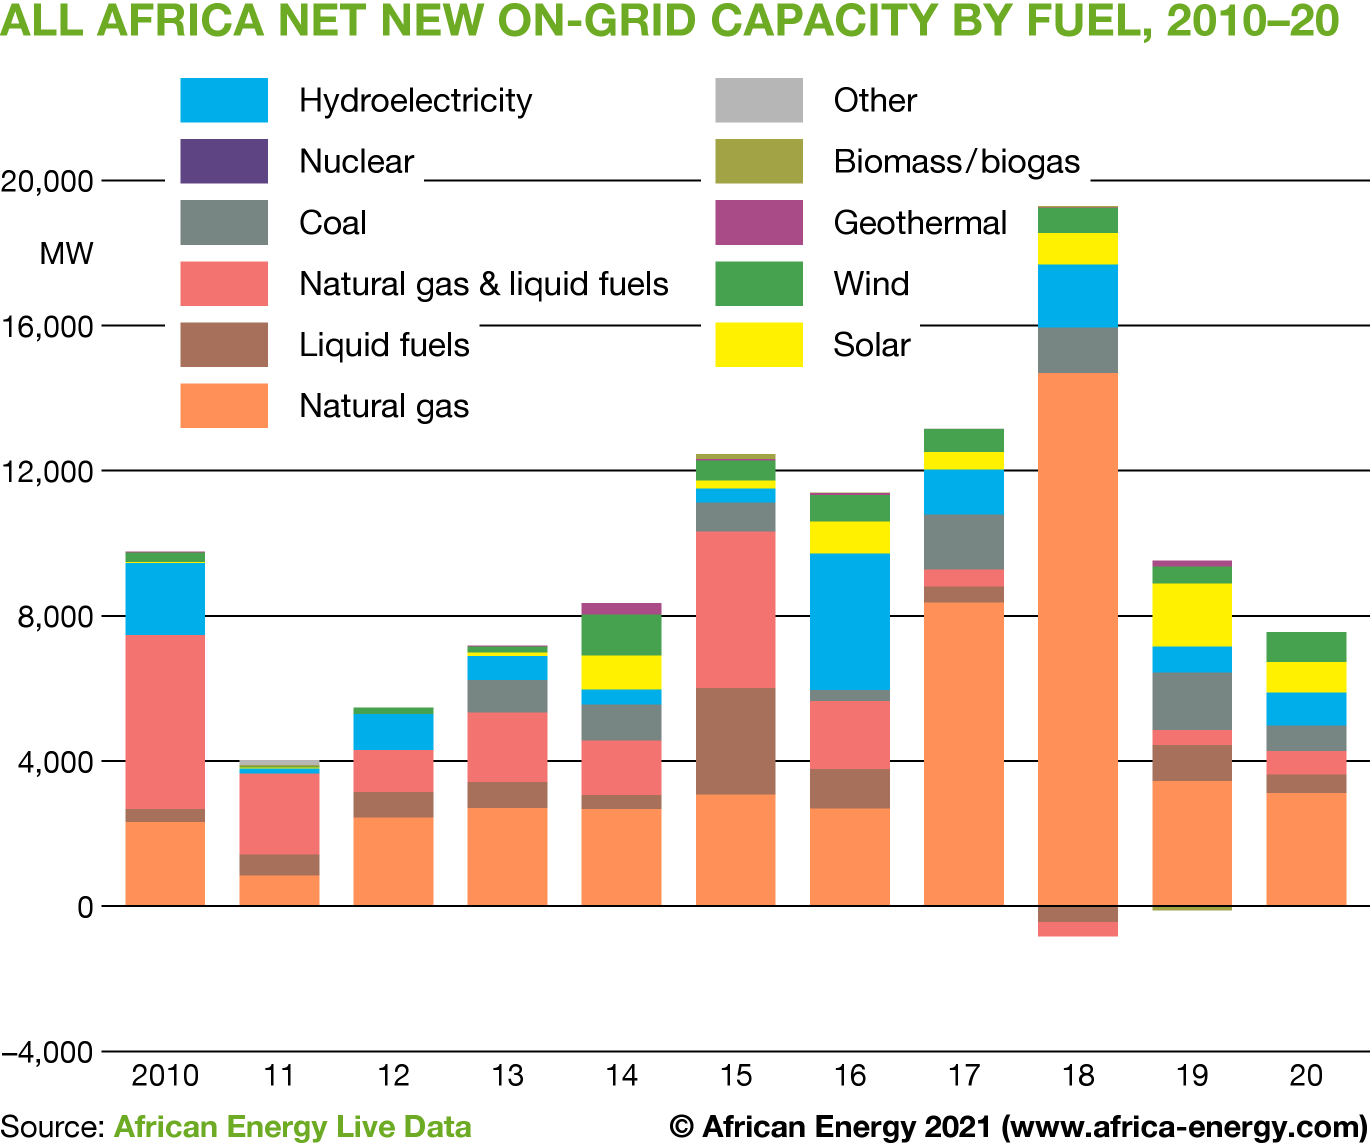 All Africa net new on-grid capacity by fuel, 2010-20